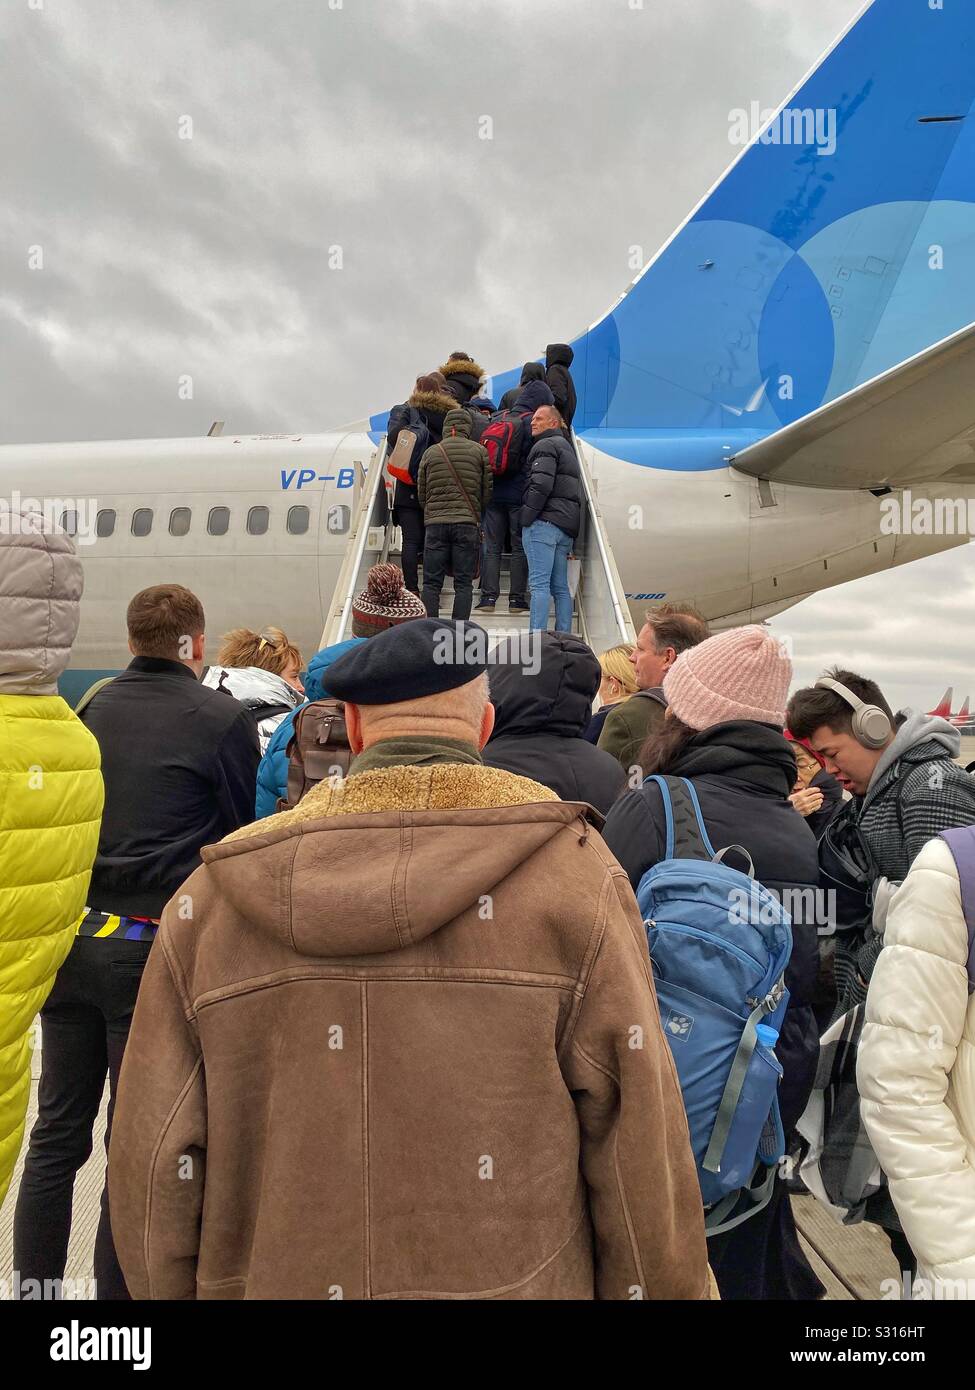 People boarding an airplane Stock Photo